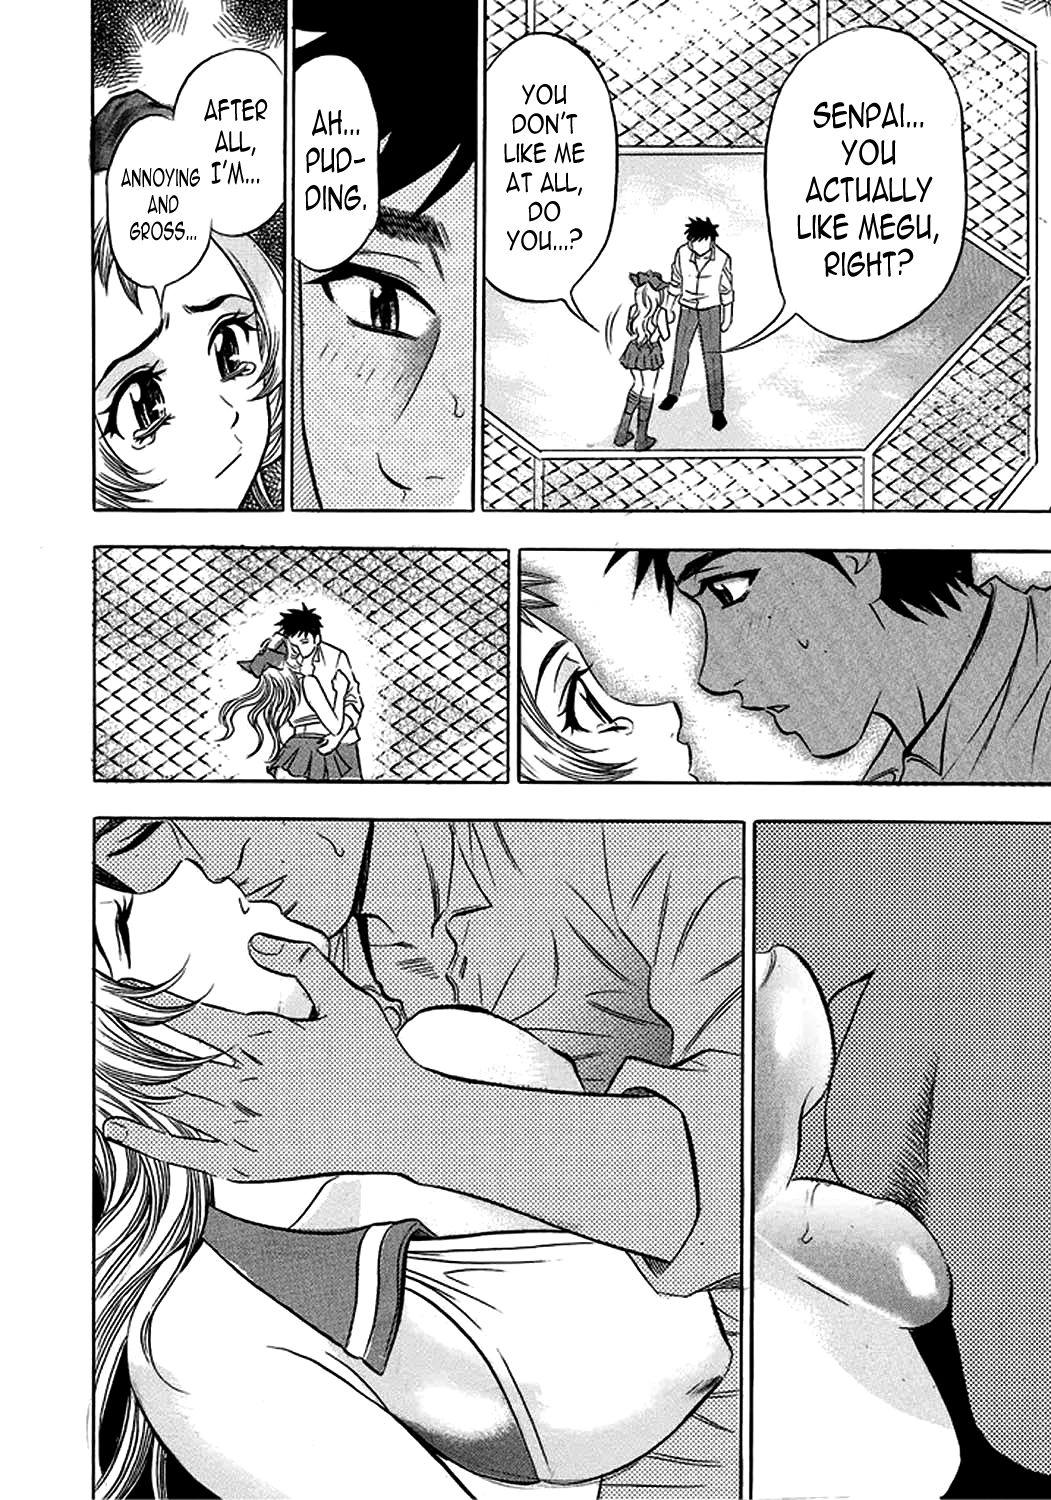 5 Page 14 Of 48 hentai doujinshi, Catfight A Go Go Ch. 